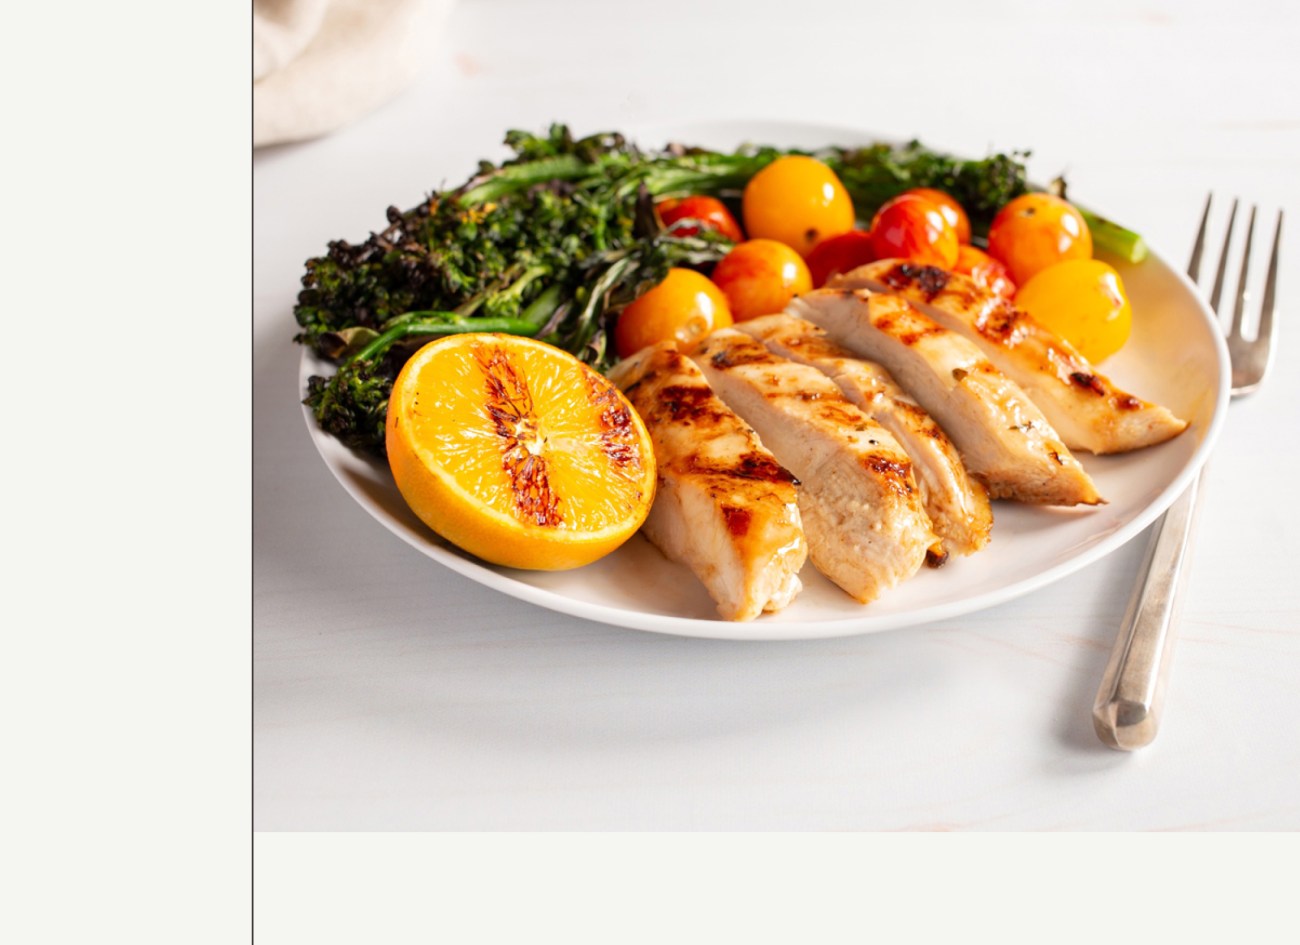 Citrus-Marinated Chicken With Grilled Broccolini and Tomatoes healthy recipe